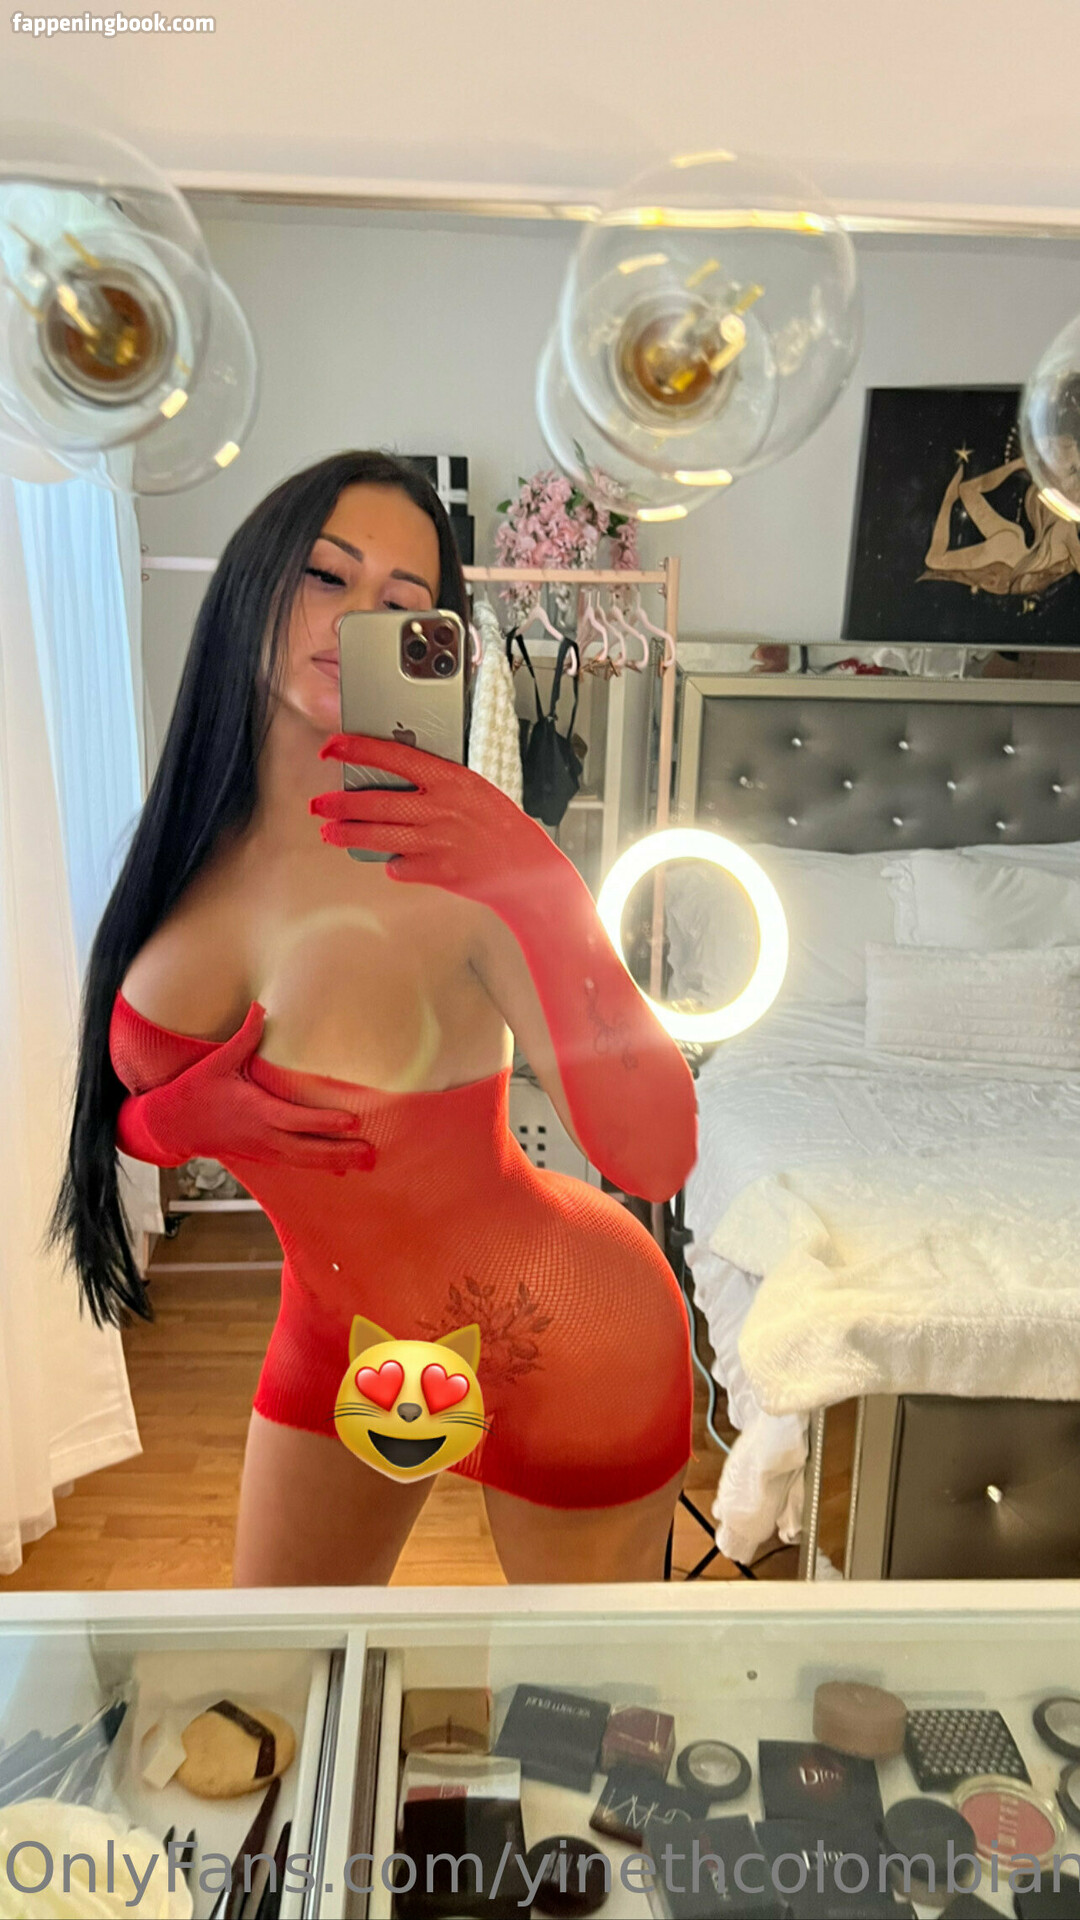 yinethcolombiana Nude OnlyFans Leaks